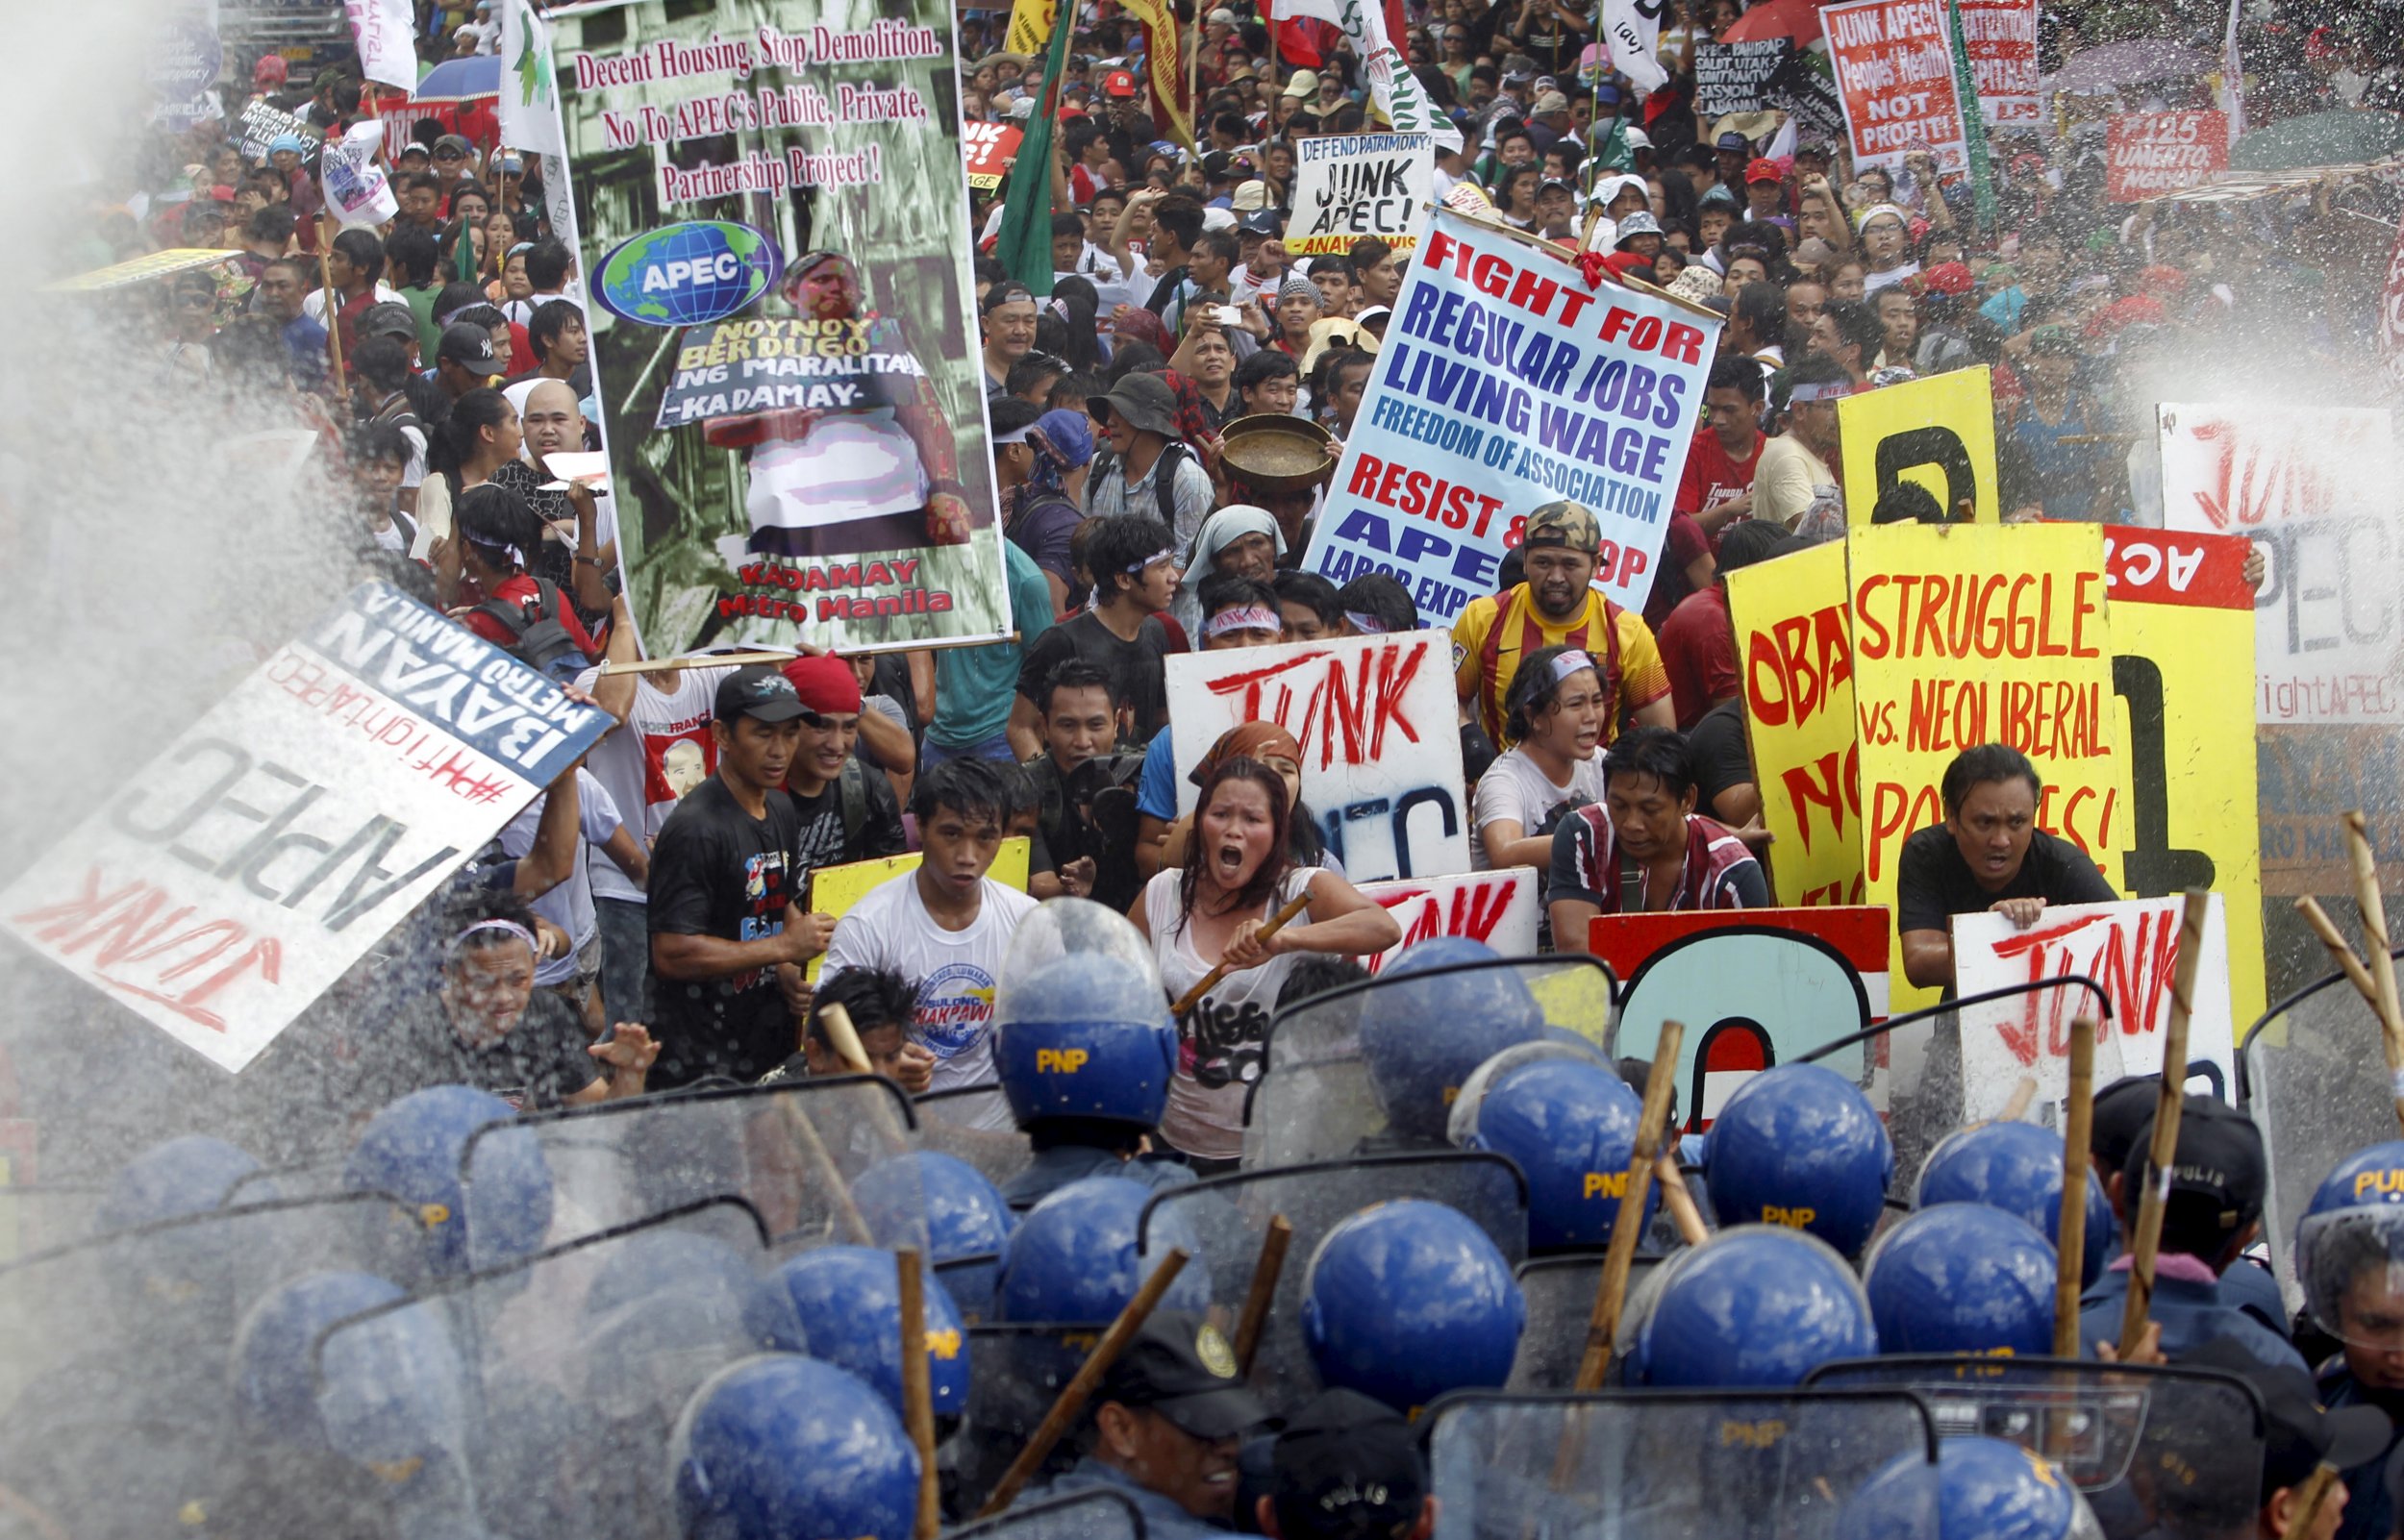 Police and Protesters Clash on Final Day of APEC Summit